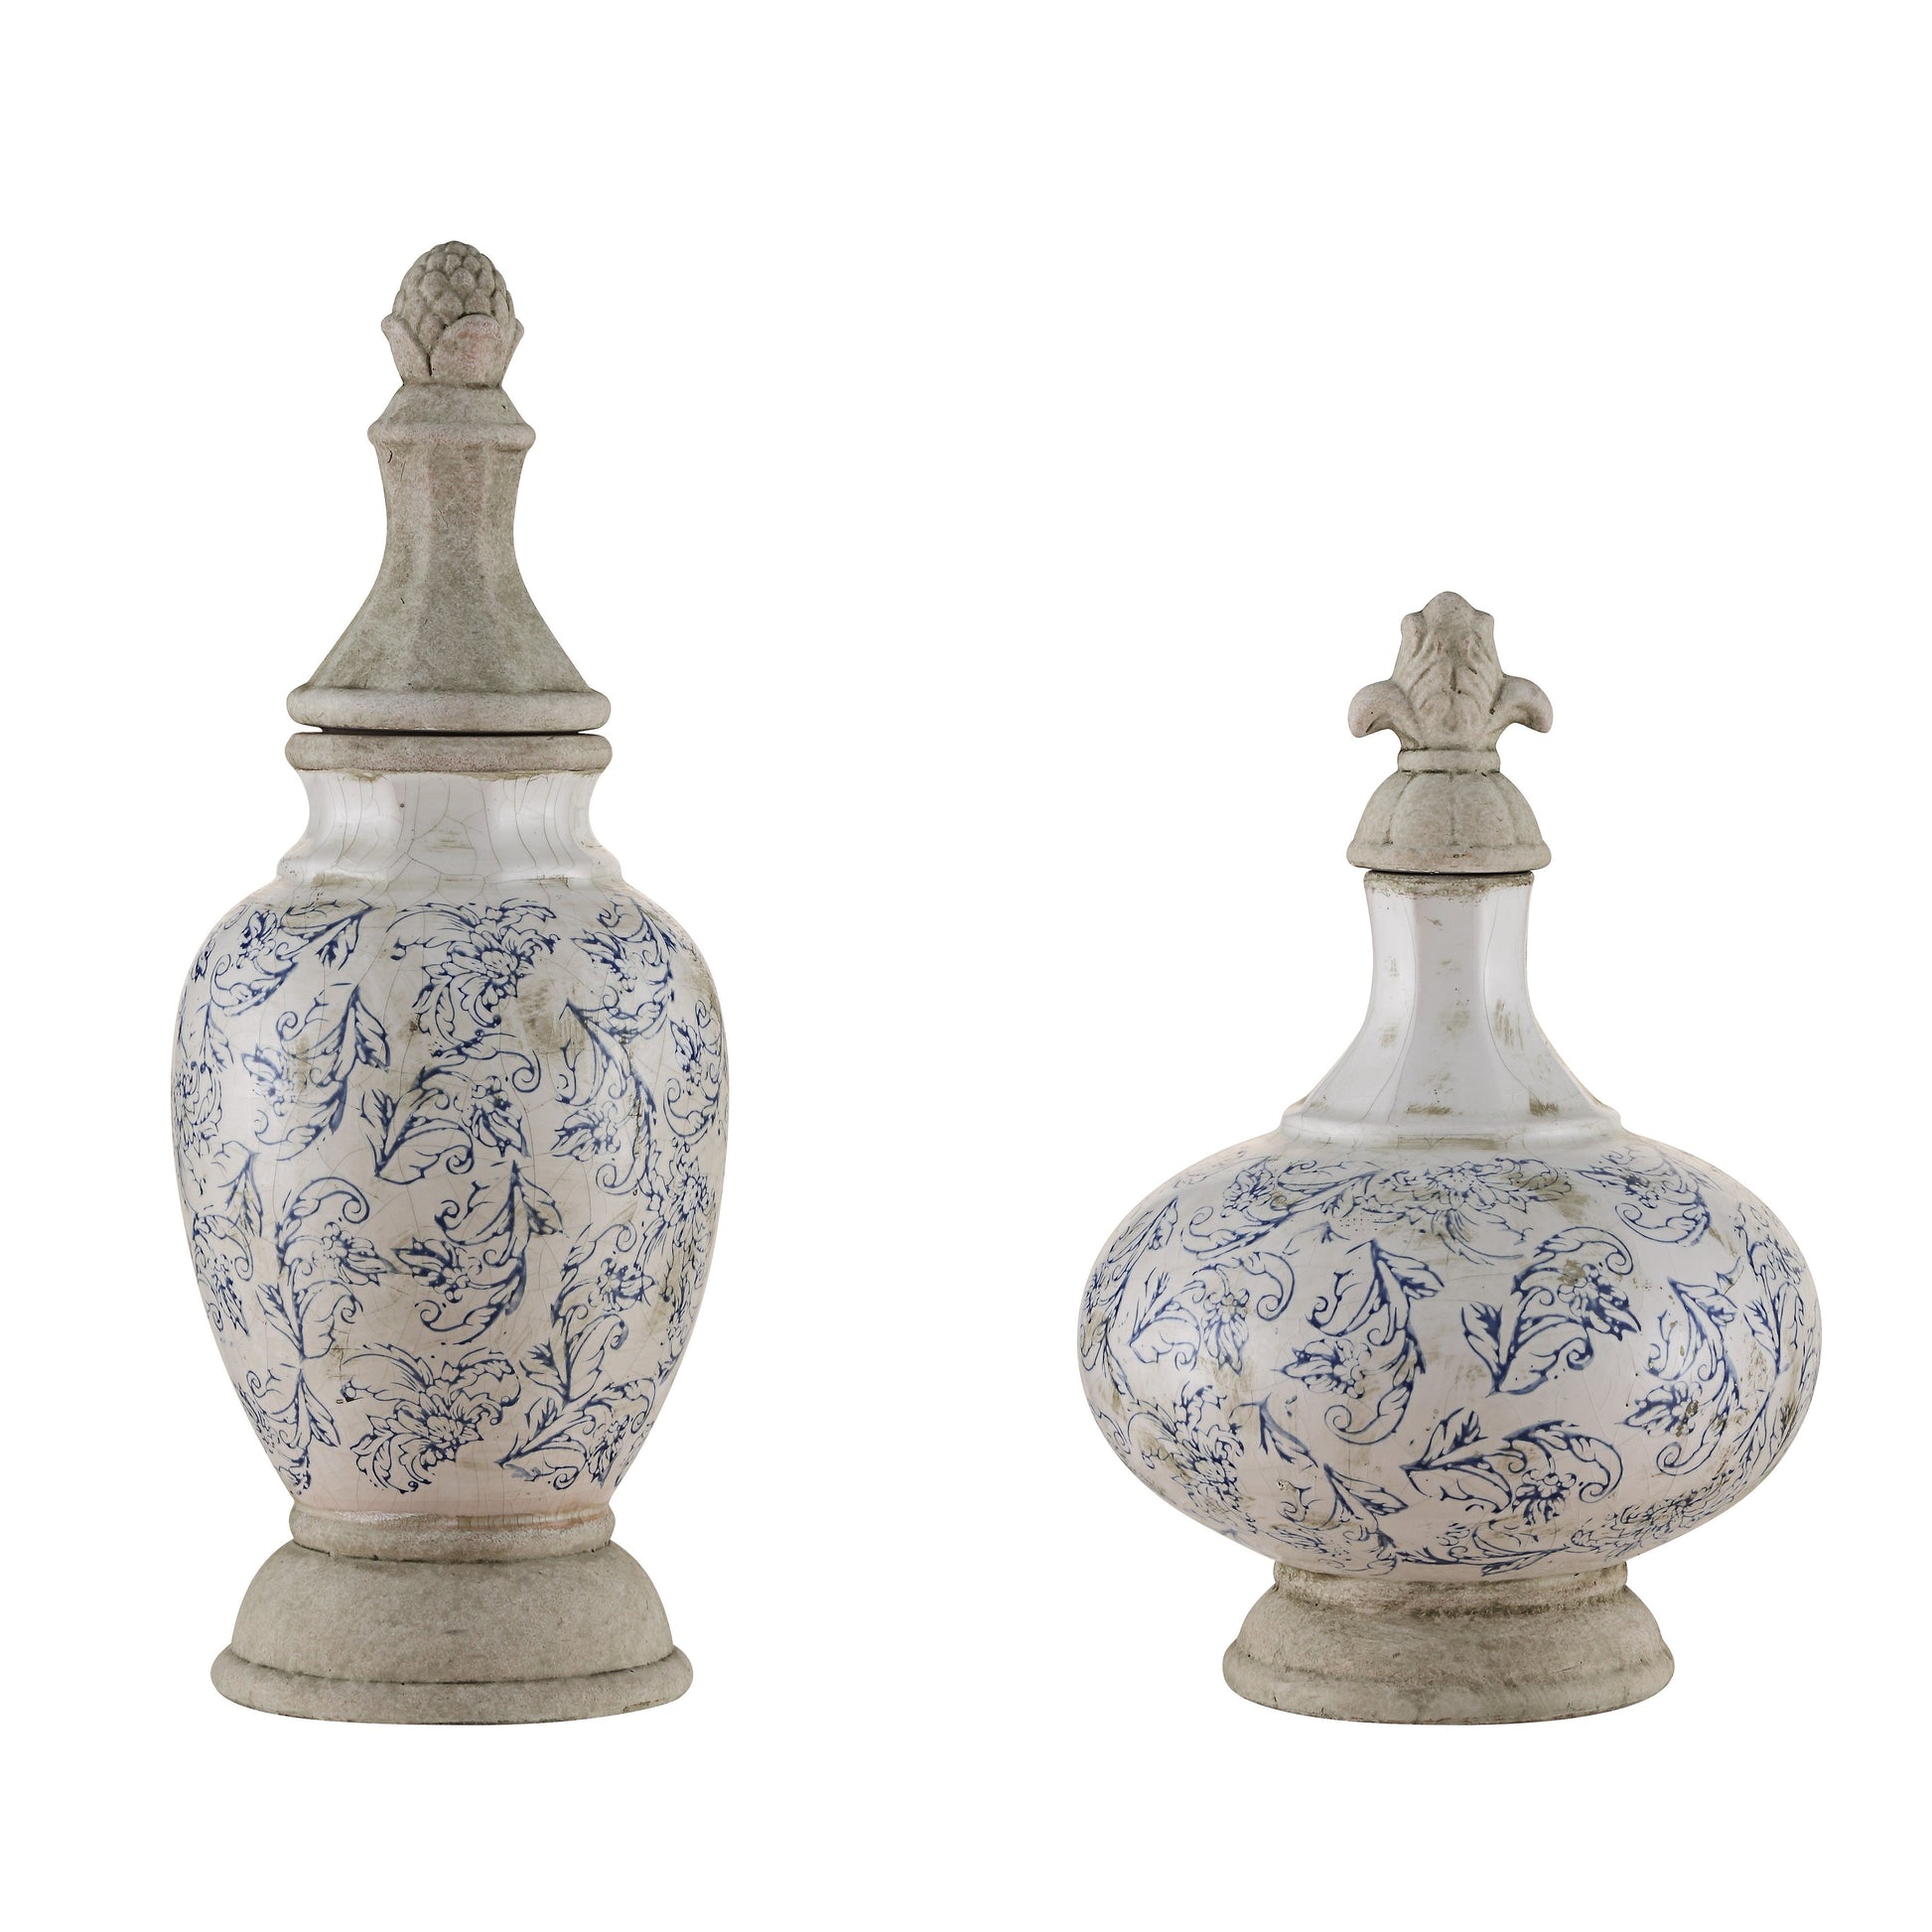 Crestview Collection Hammet 21" & 15" 2-Piece Traditional Ceramic Lidded Vase In Delft Blue and White Finish